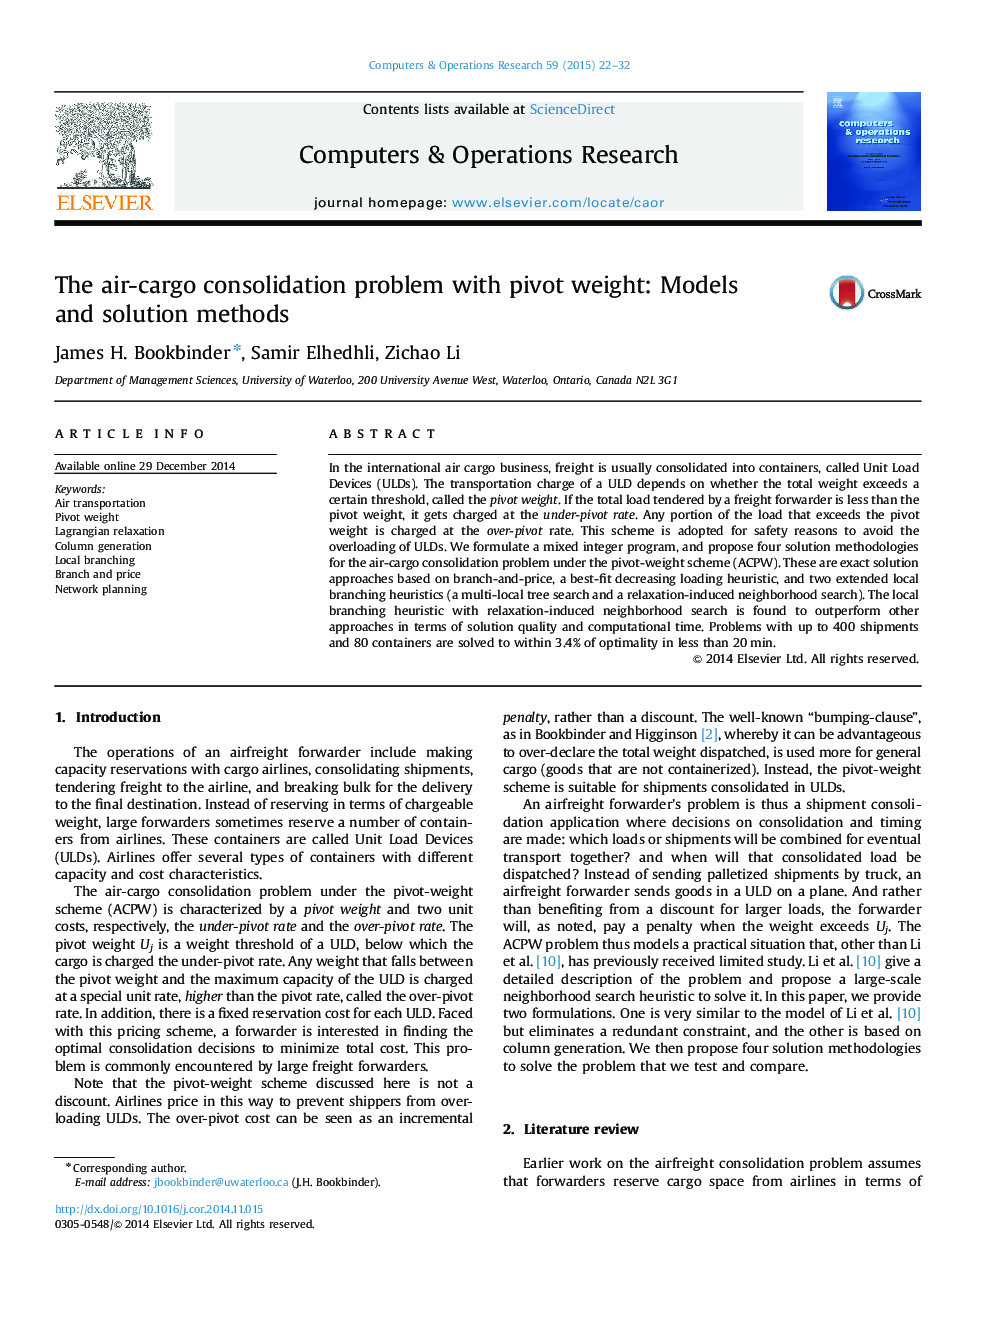 The air-cargo consolidation problem with pivot weight: Models and solution methods